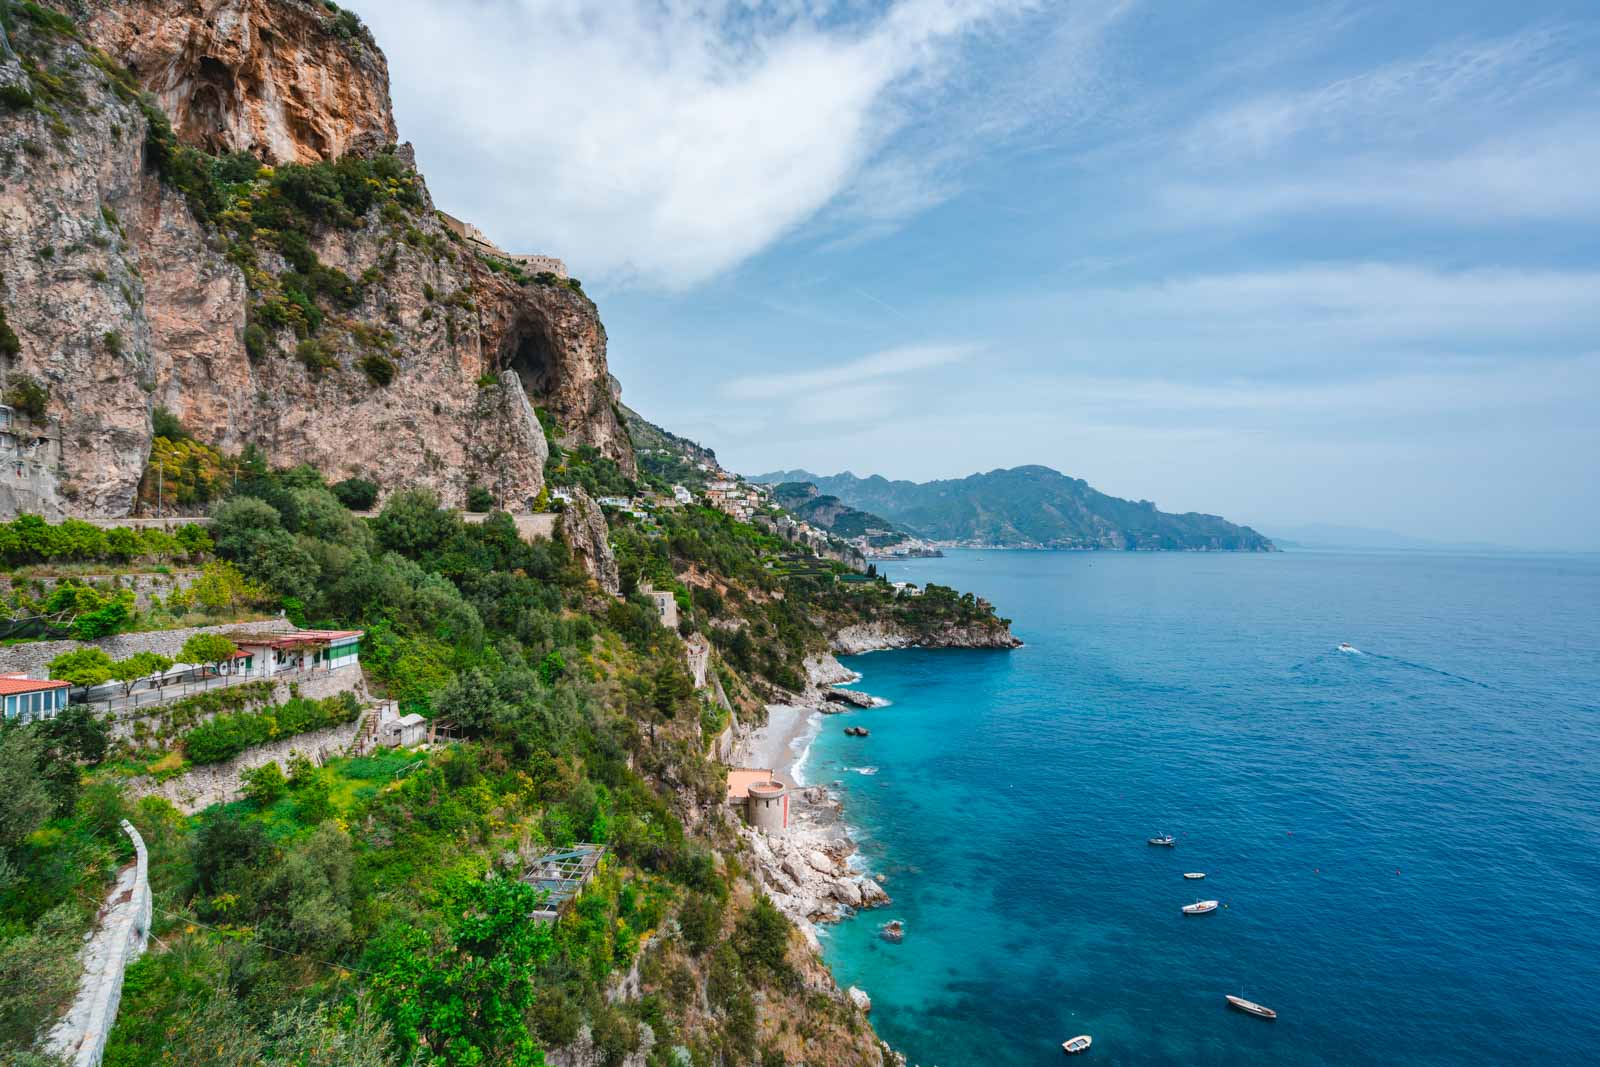 Other Amalfi Coast towns you should visit